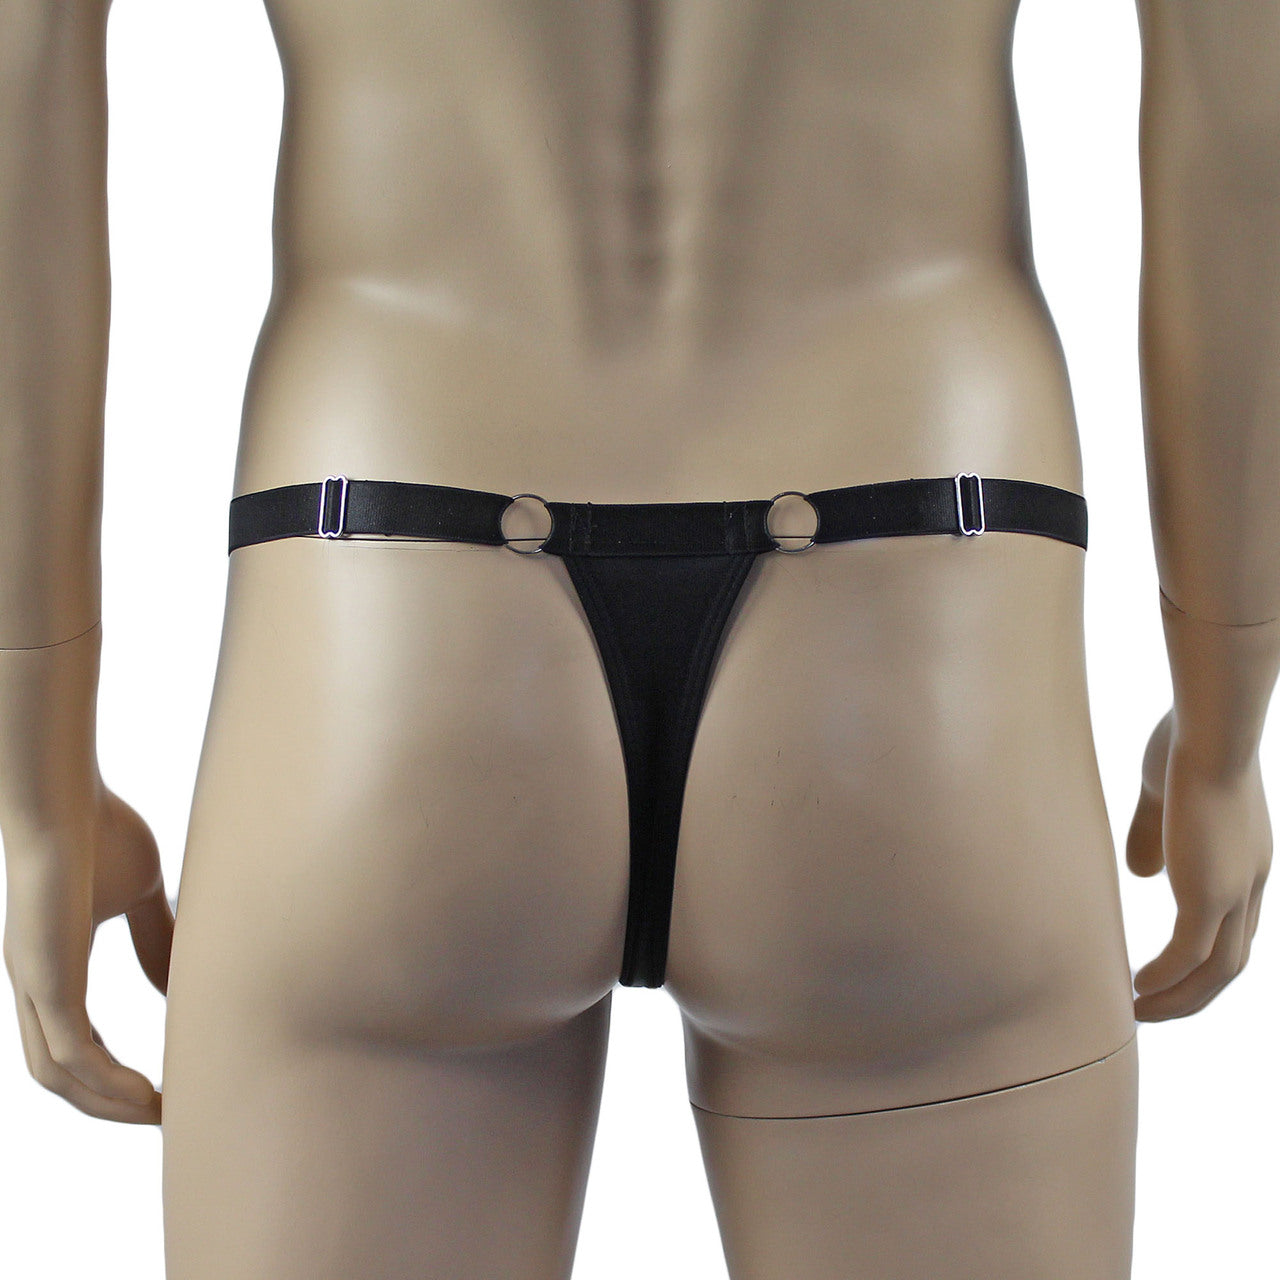 Male Jack Spandex Thong with Ring Sides and Adjustable Strap Black